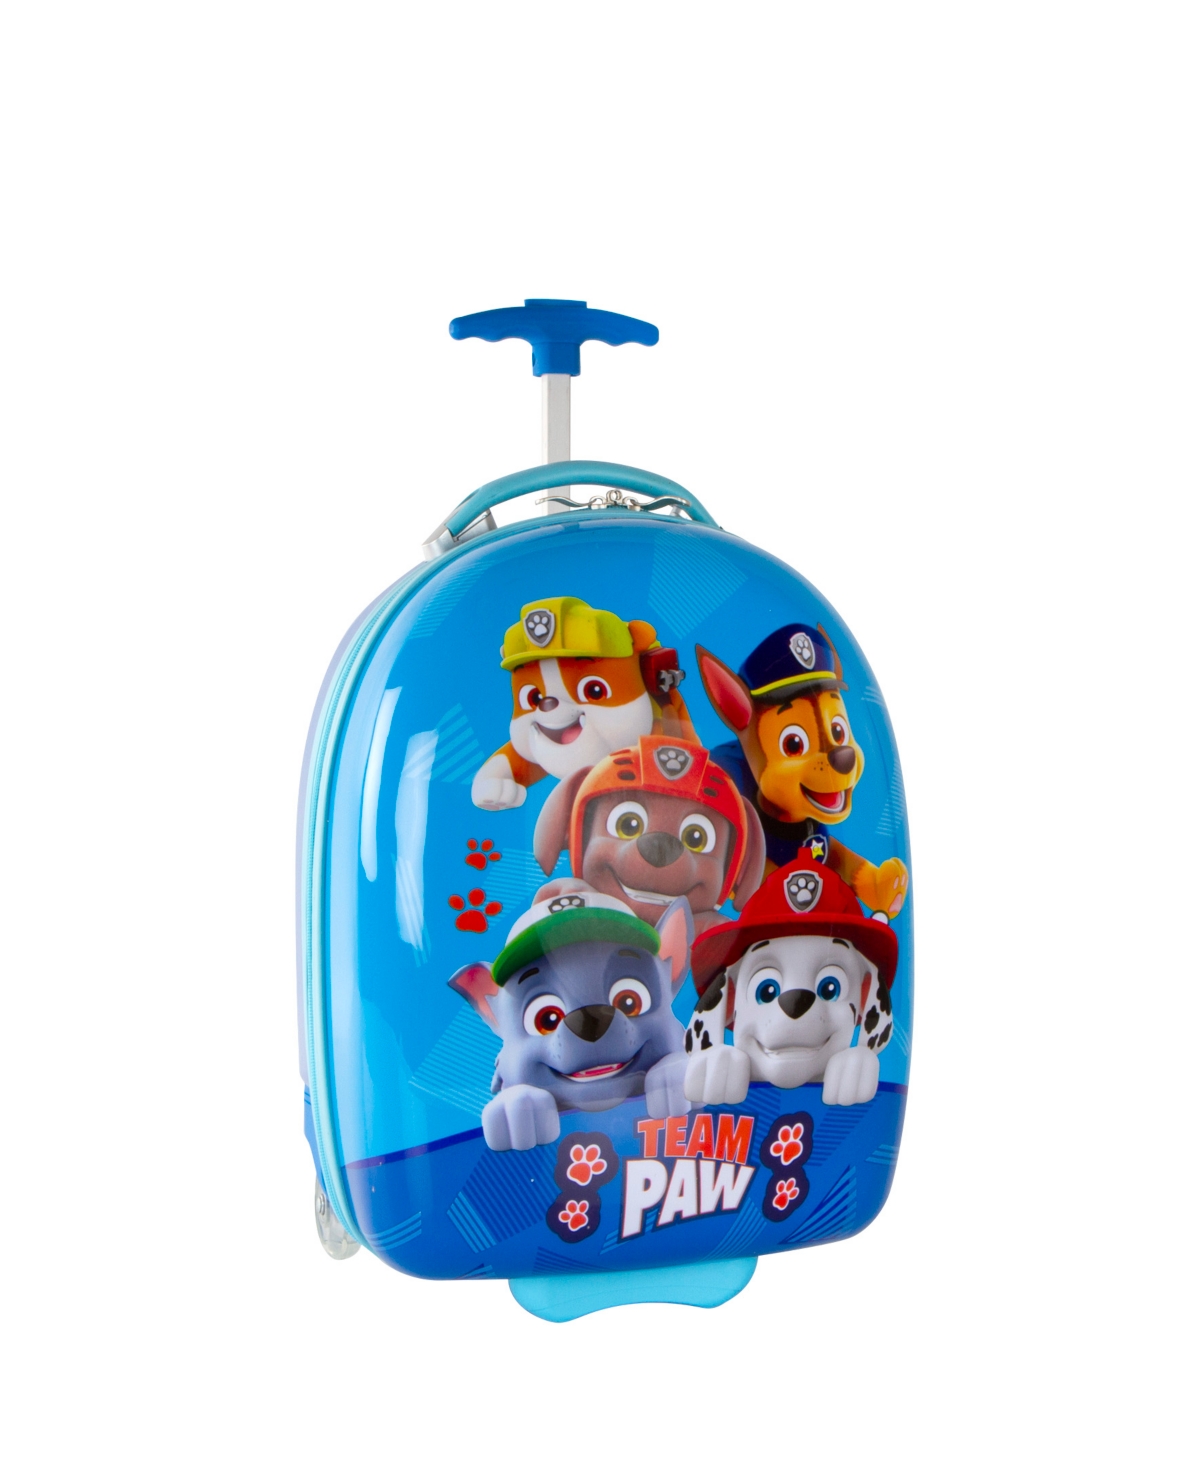 Heys Nickelodeon Paw Patrol 18" Round Carry-on Luggage In Blue